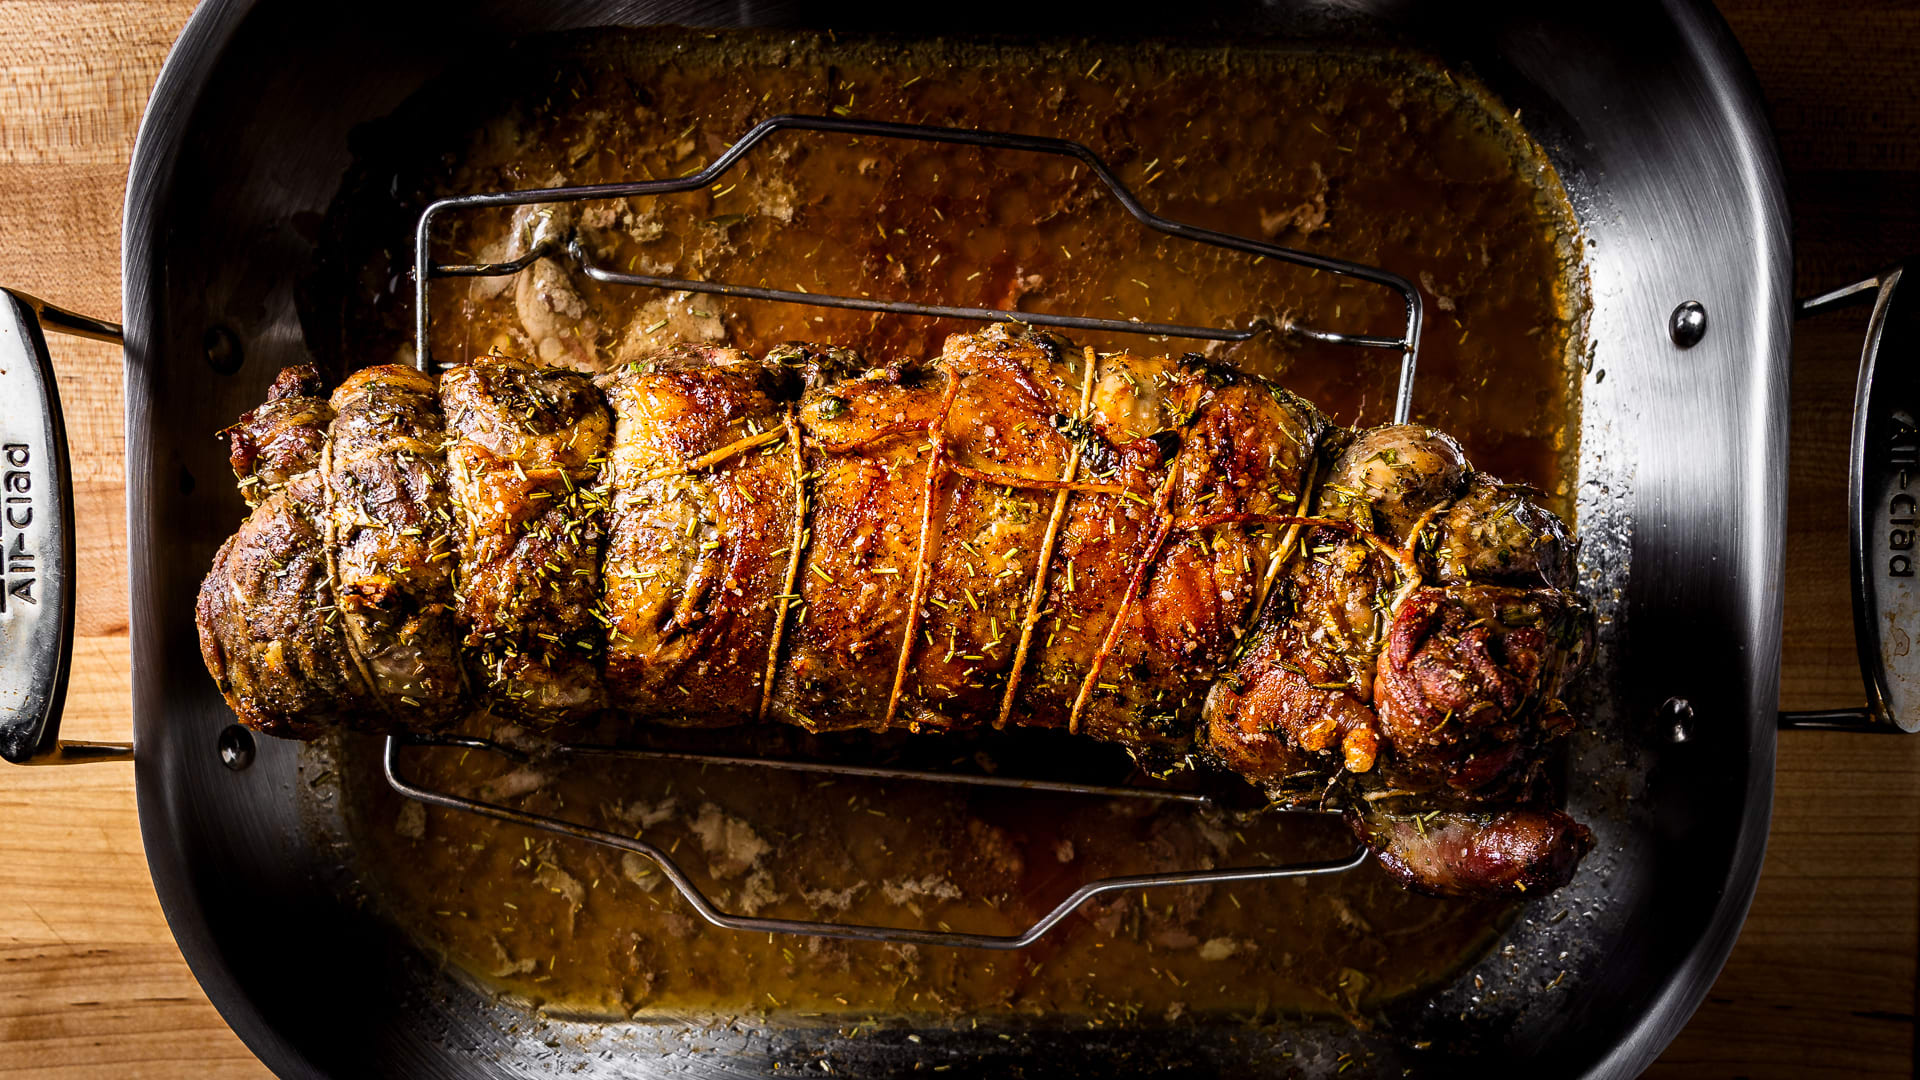 Roasted Boneless Leg of Lamb with Rosemary and Garlic - Sip and Feast